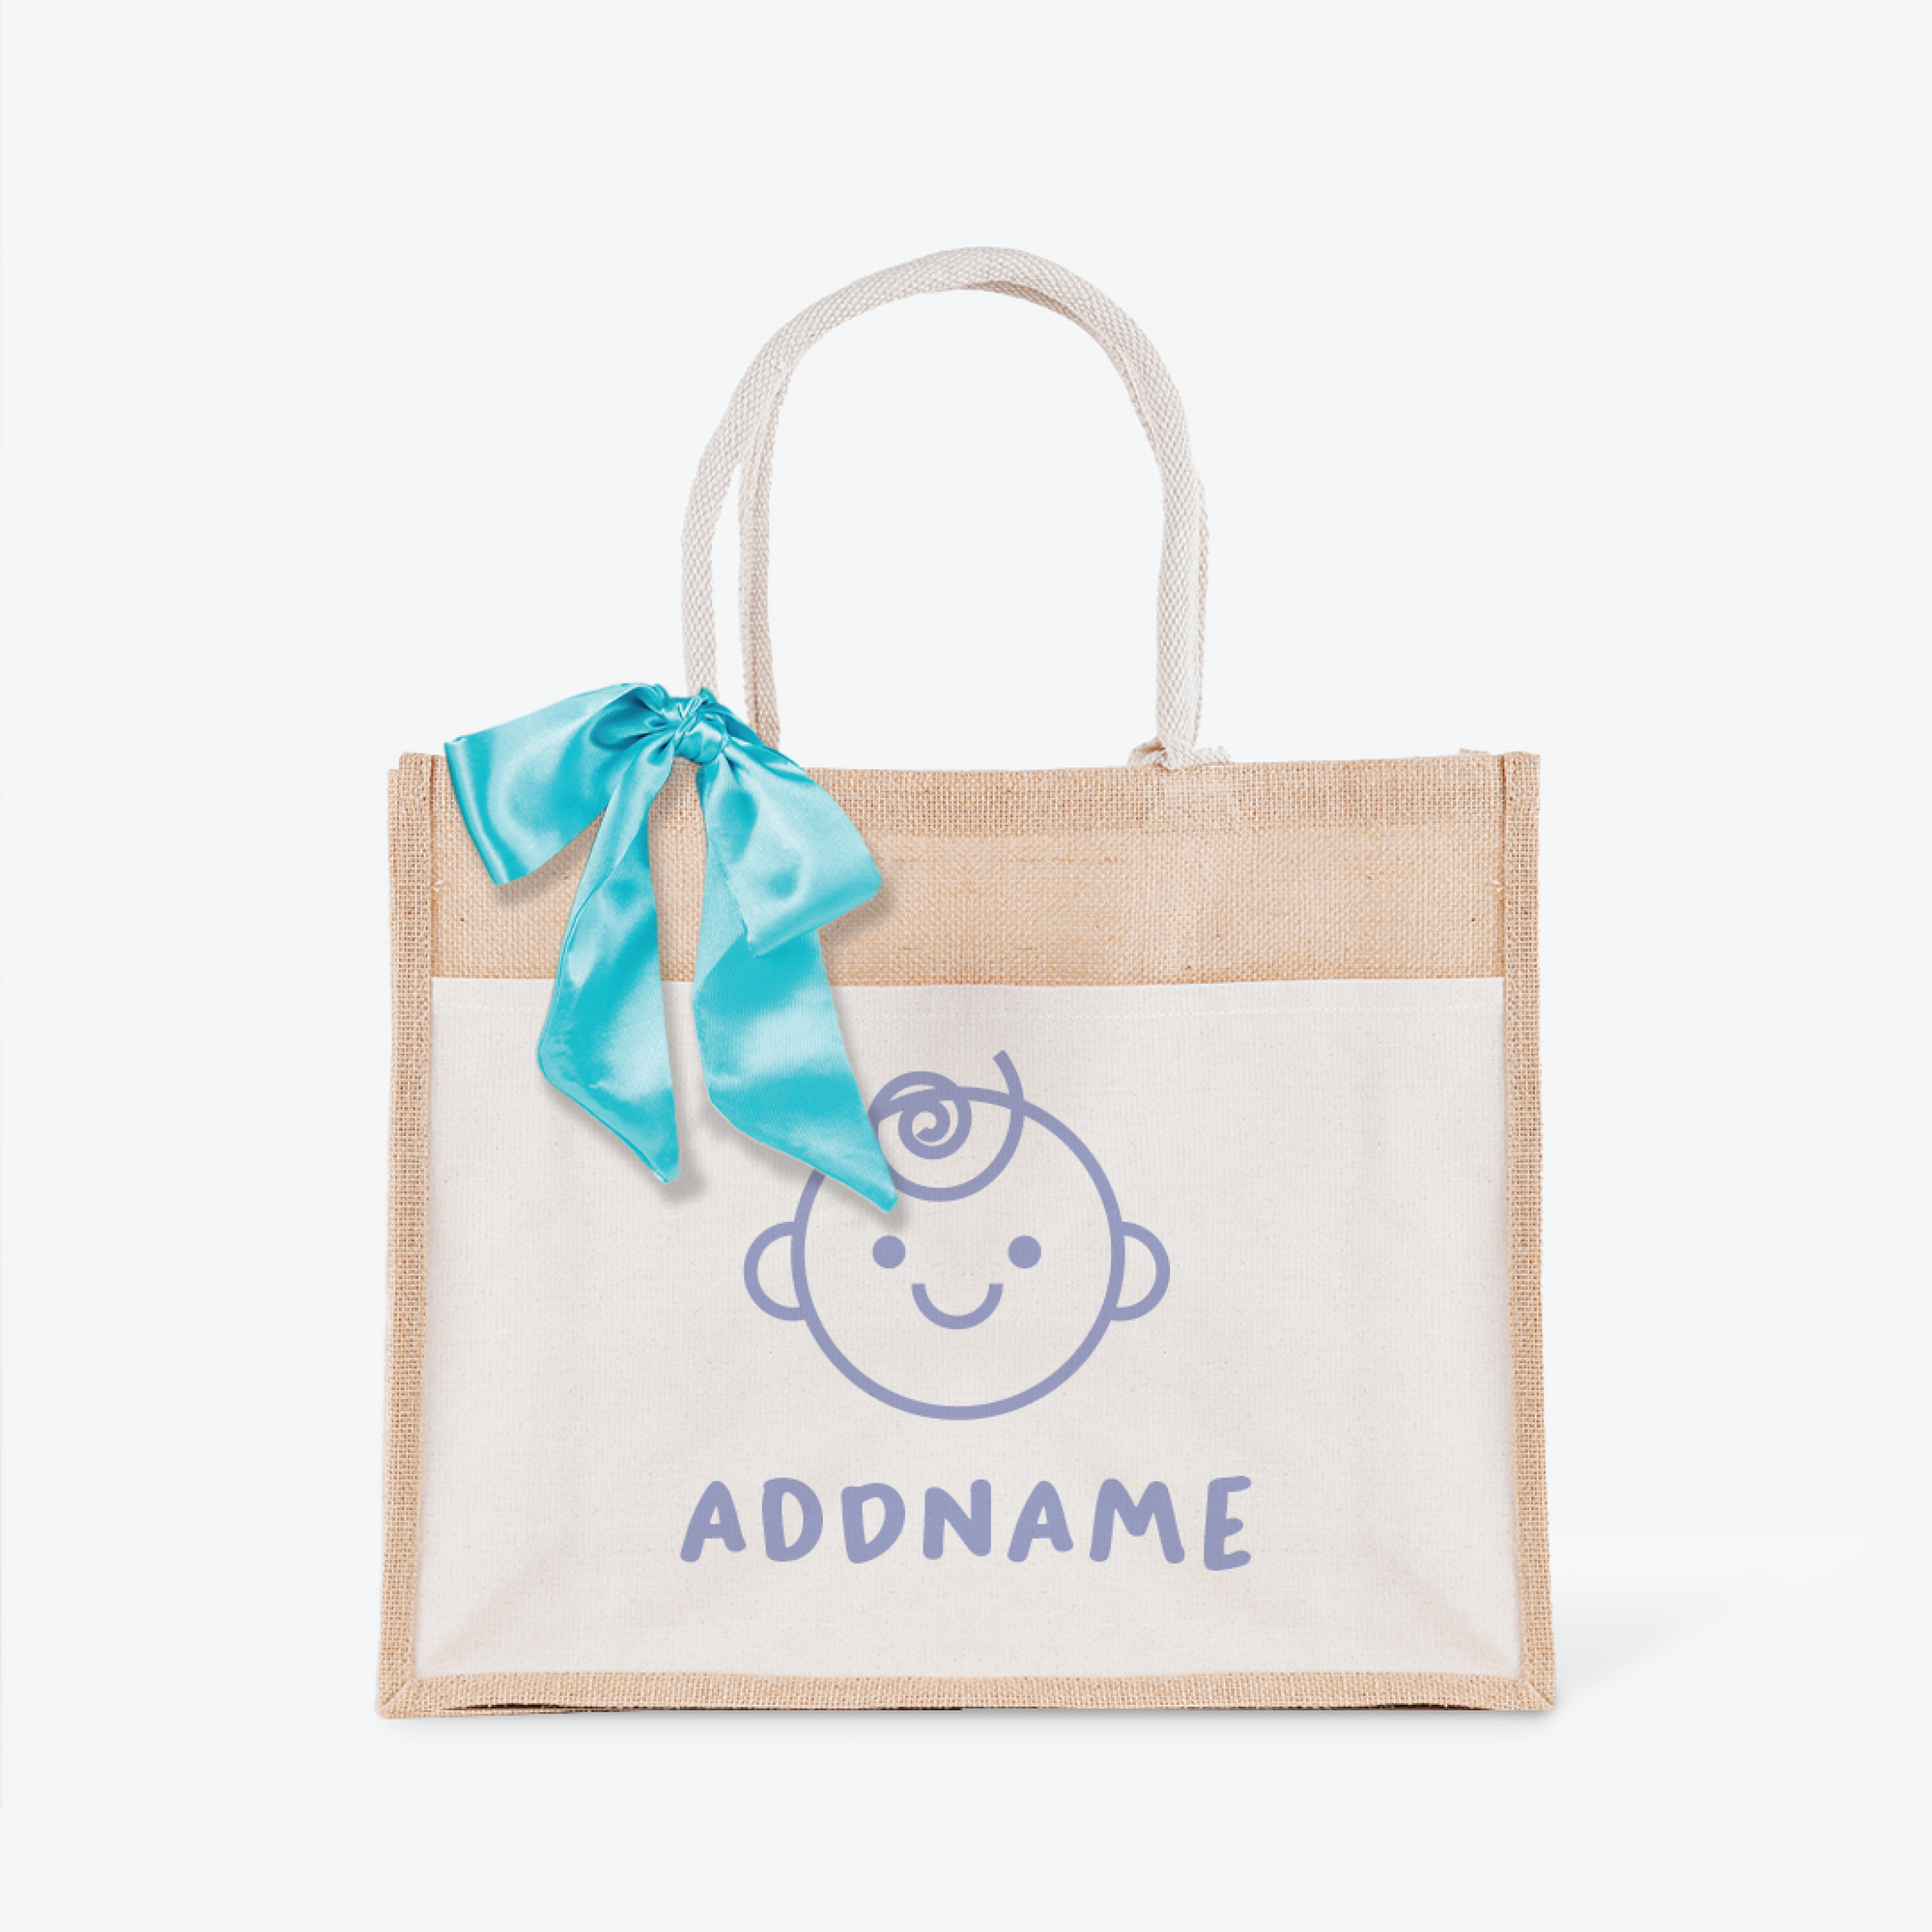 Dreamy Blue Jute Bag with Front Pocket